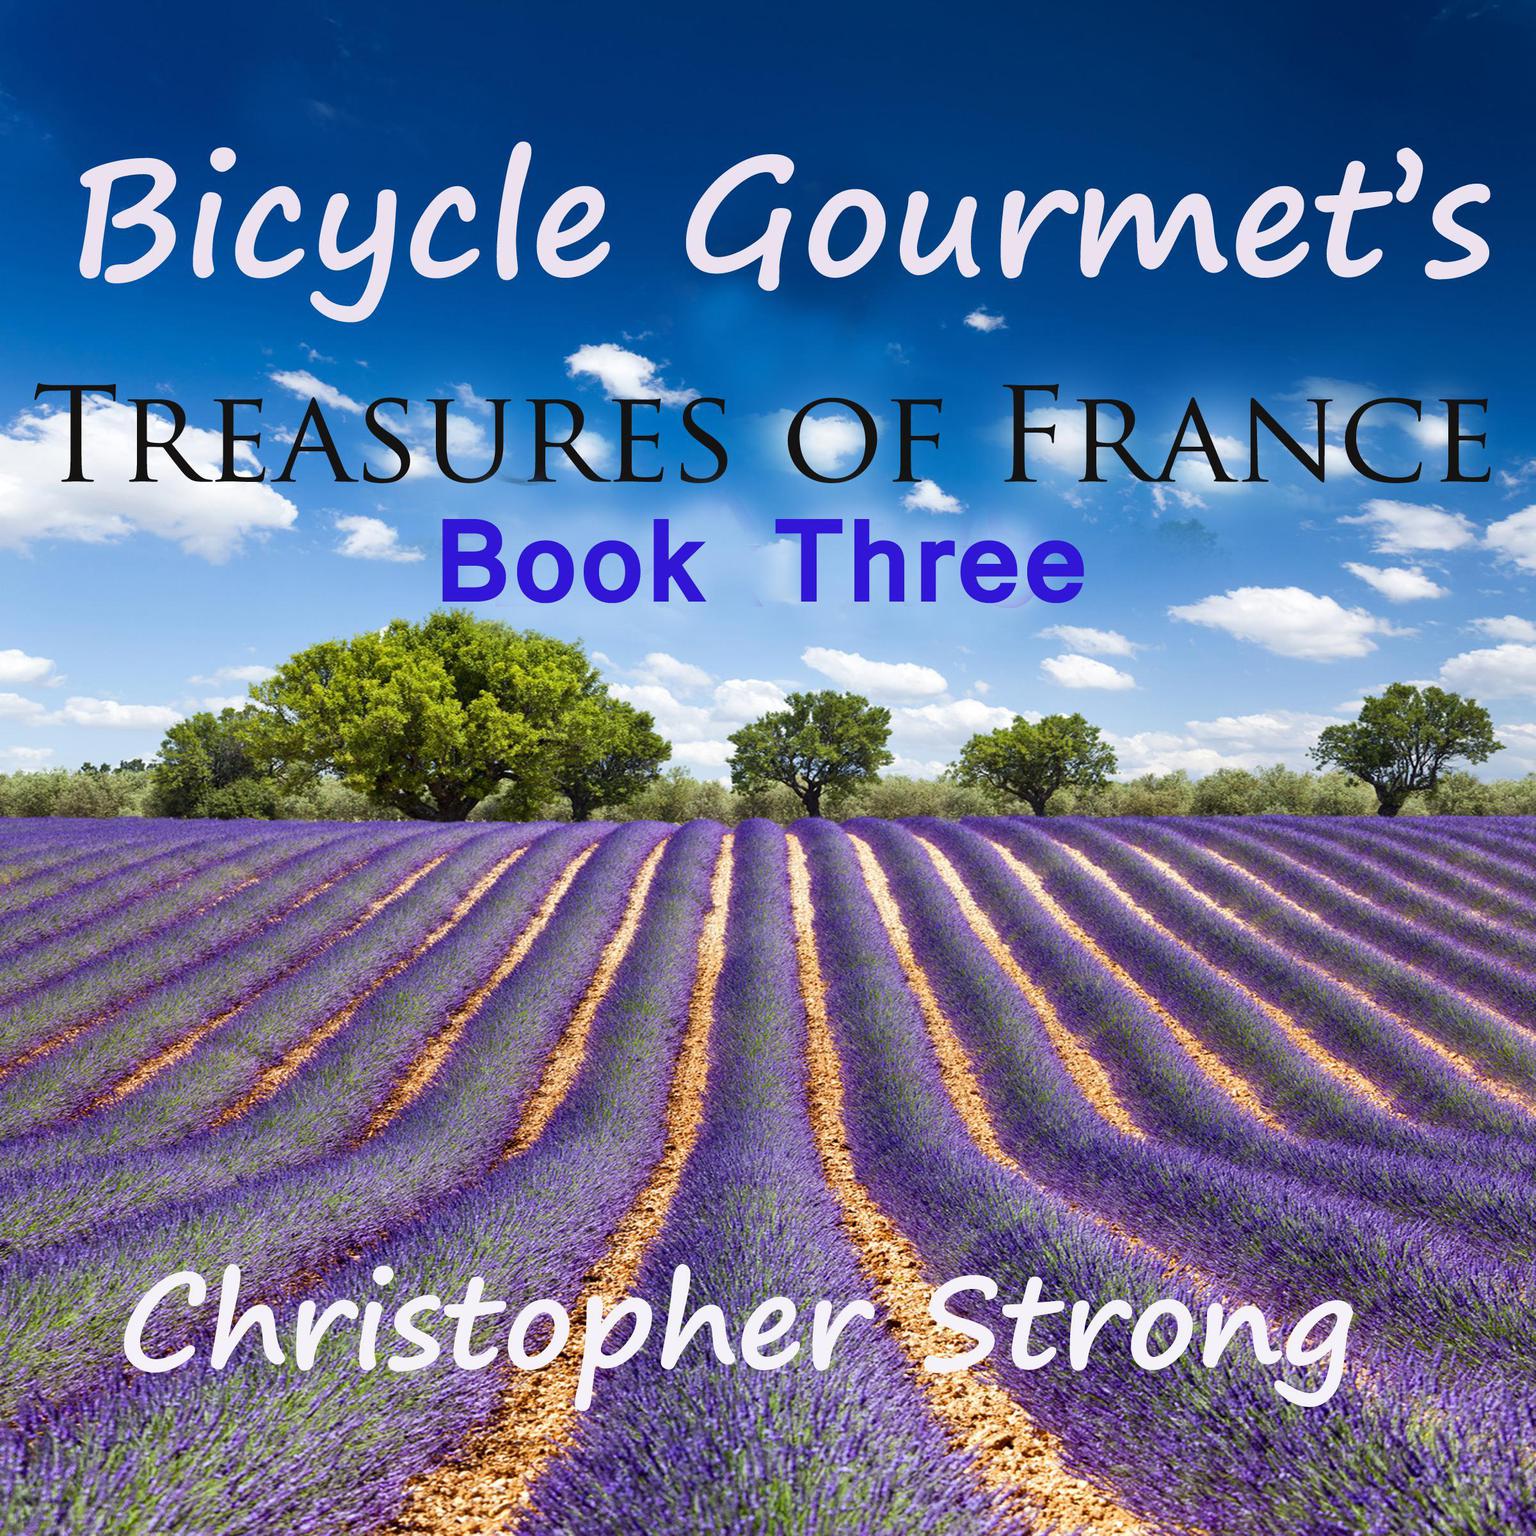 Bicycle Gourmets Treasures of France - Book Three Audiobook, by Christopher Strong